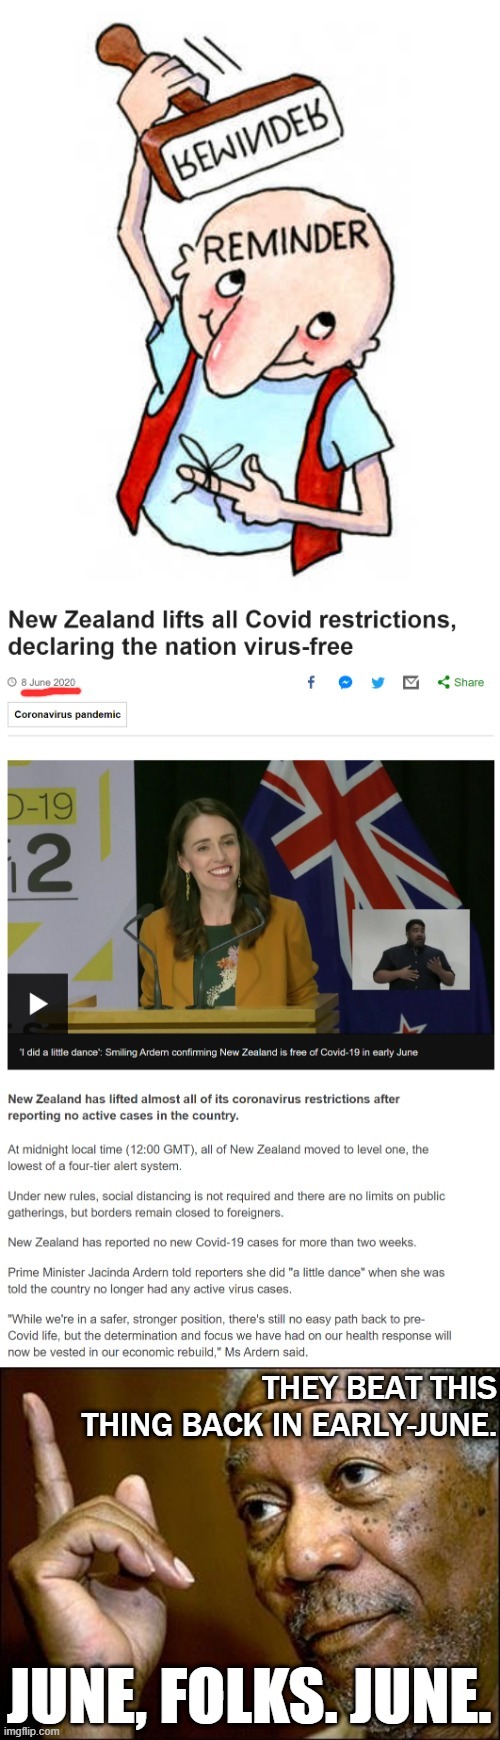 Reminder about New Zealand's stunning success in containing Covid. Wonder what they did? | image tagged in covid-19,covid,new zealand,coronavirus,social distancing,pandemic | made w/ Imgflip meme maker